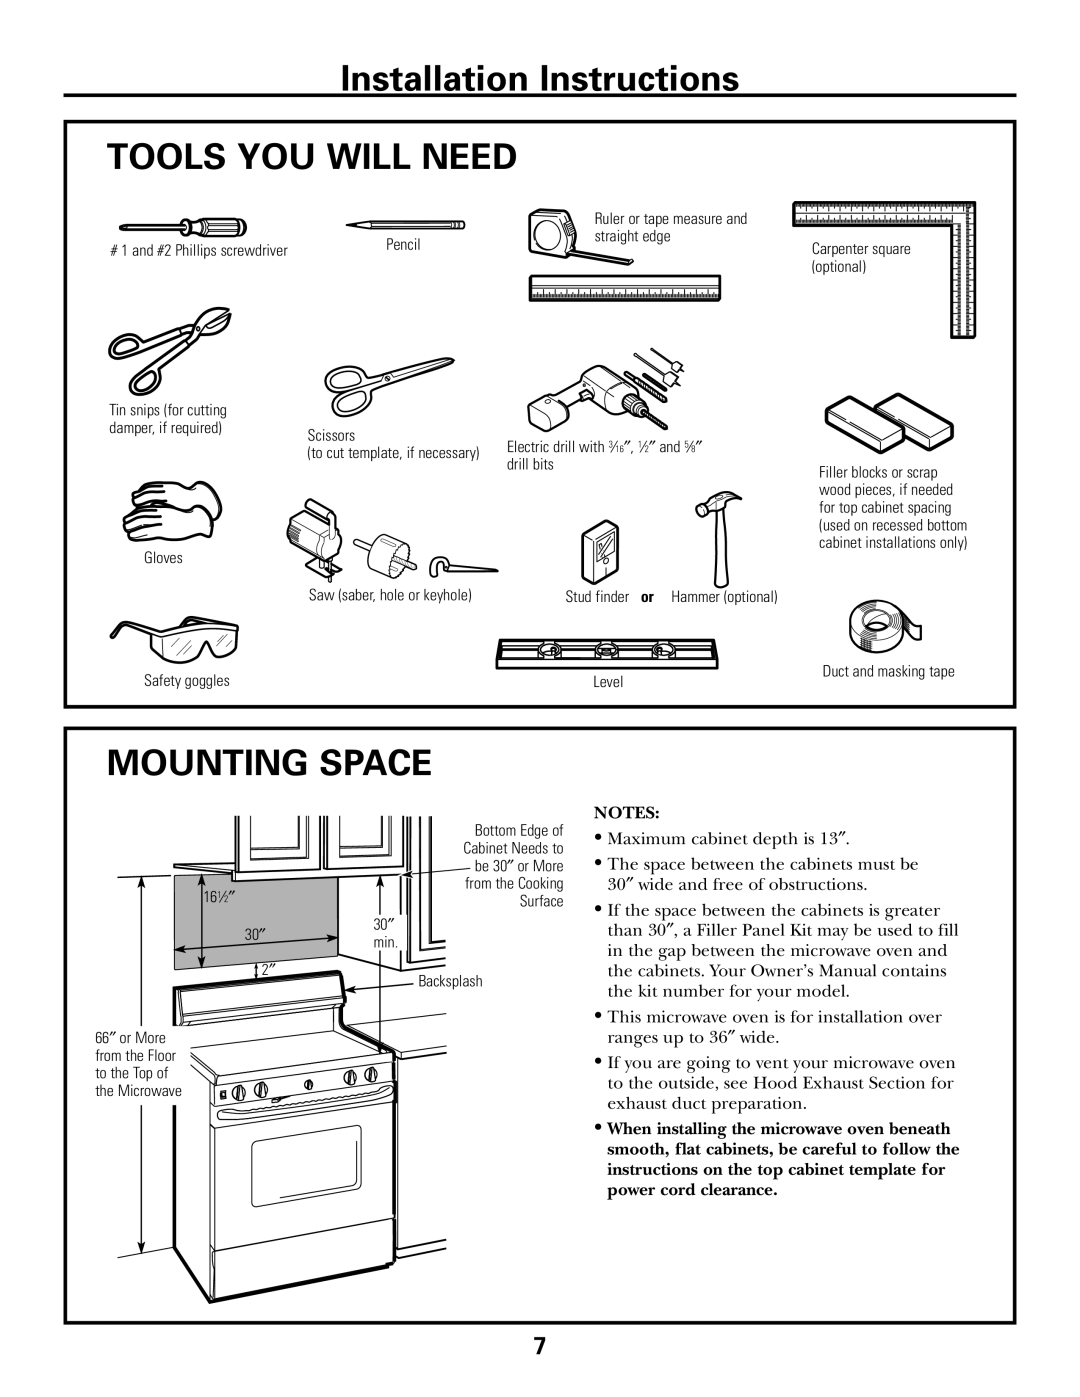 GE PVM2070 warranty Installation Instructions TOOLS YOU WILL NEED, Mounting Space 